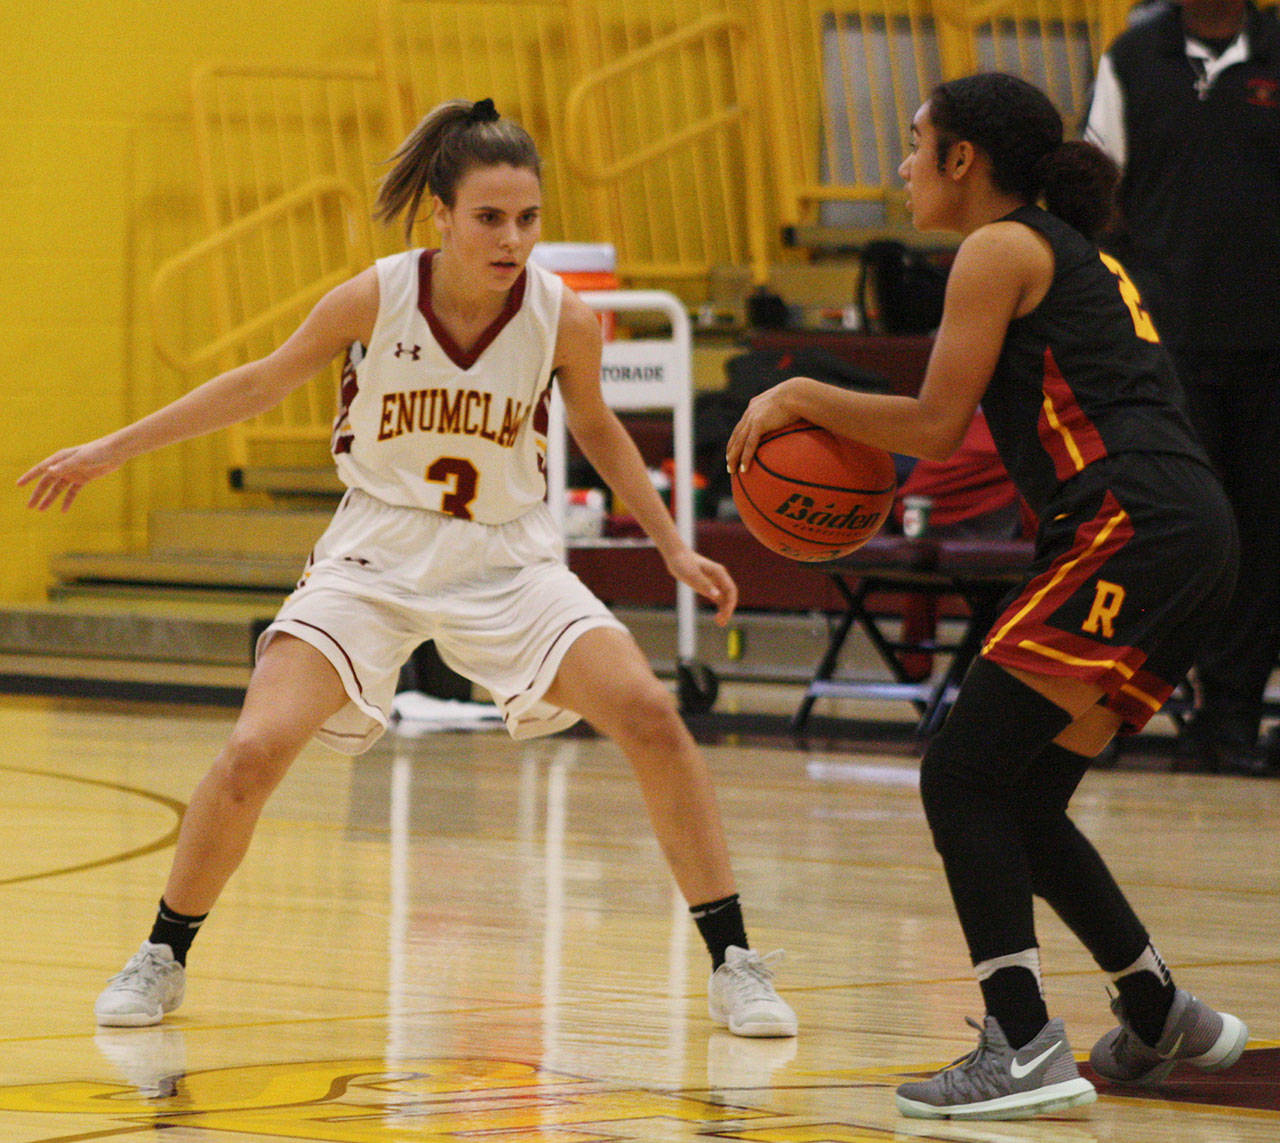 Enumclaw High’s Sawyer Anderson is one of many returning players to the Hornet’s basketball team. This year, she’s No. 11. File photo by Kevin Hanson